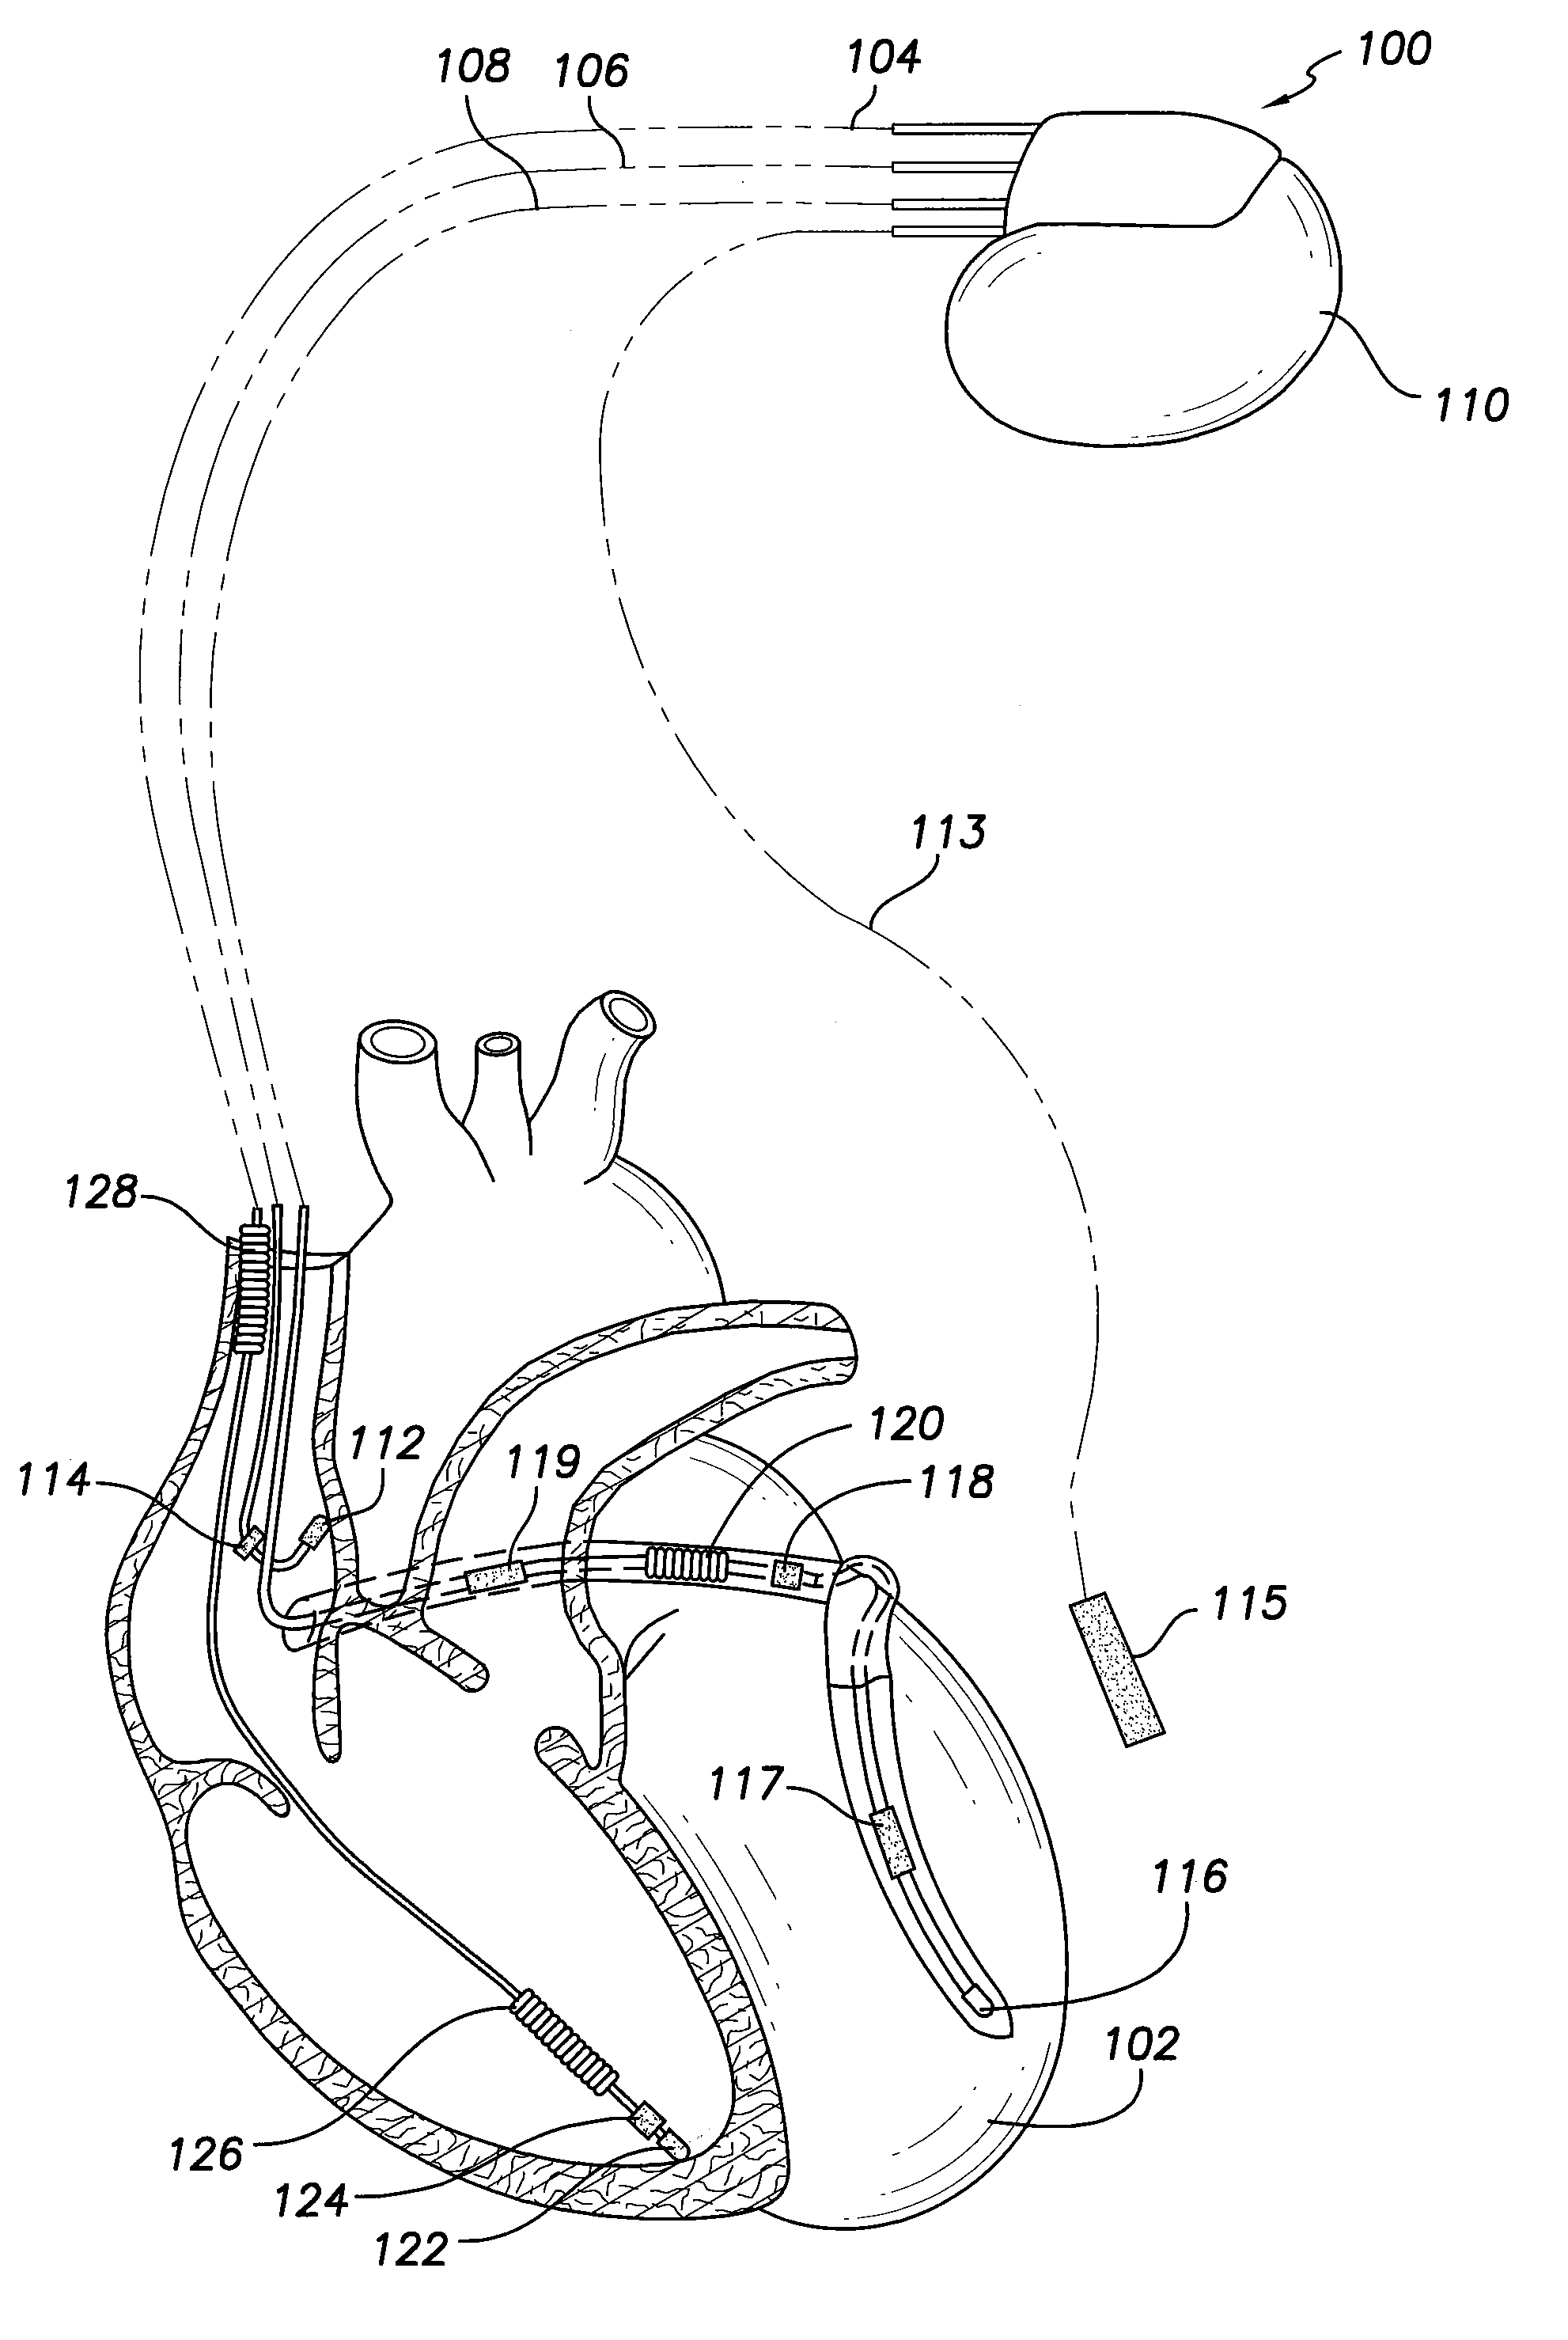 Method and system for identifying a potential lead failure in an implantable medical device